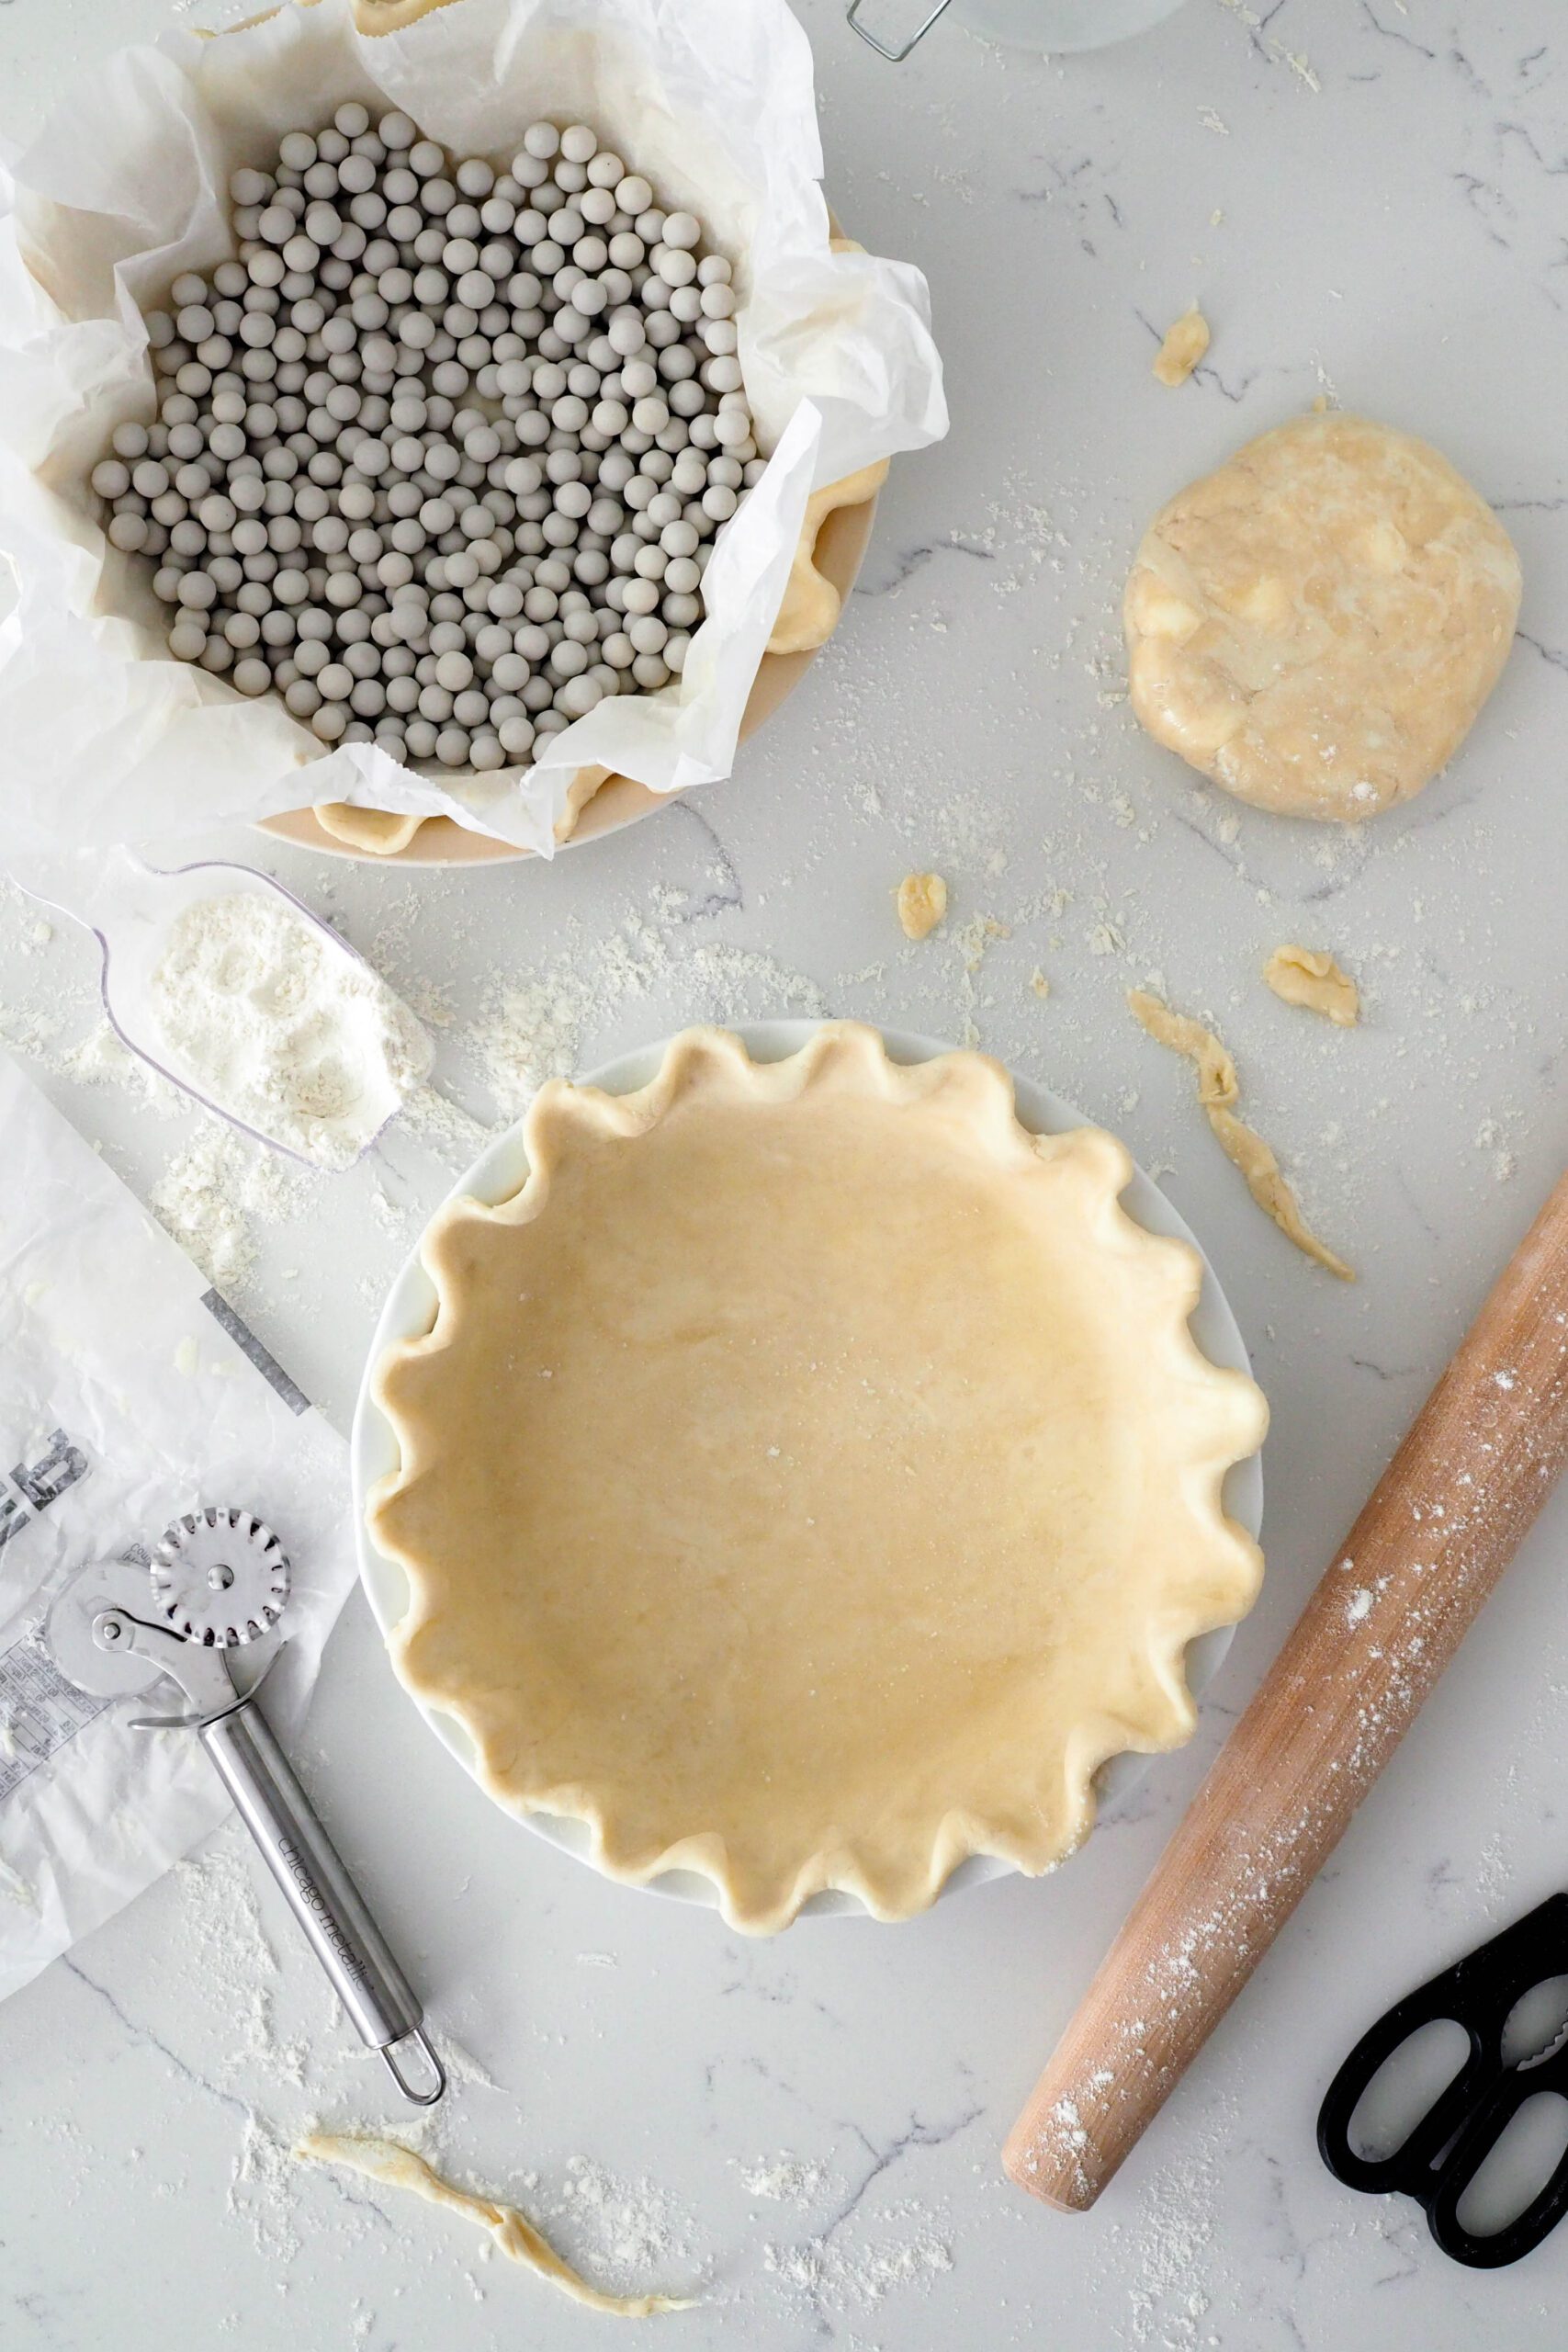 A fluted, unbaked pie crust next to another pie crust filled with ceramic pie weights.